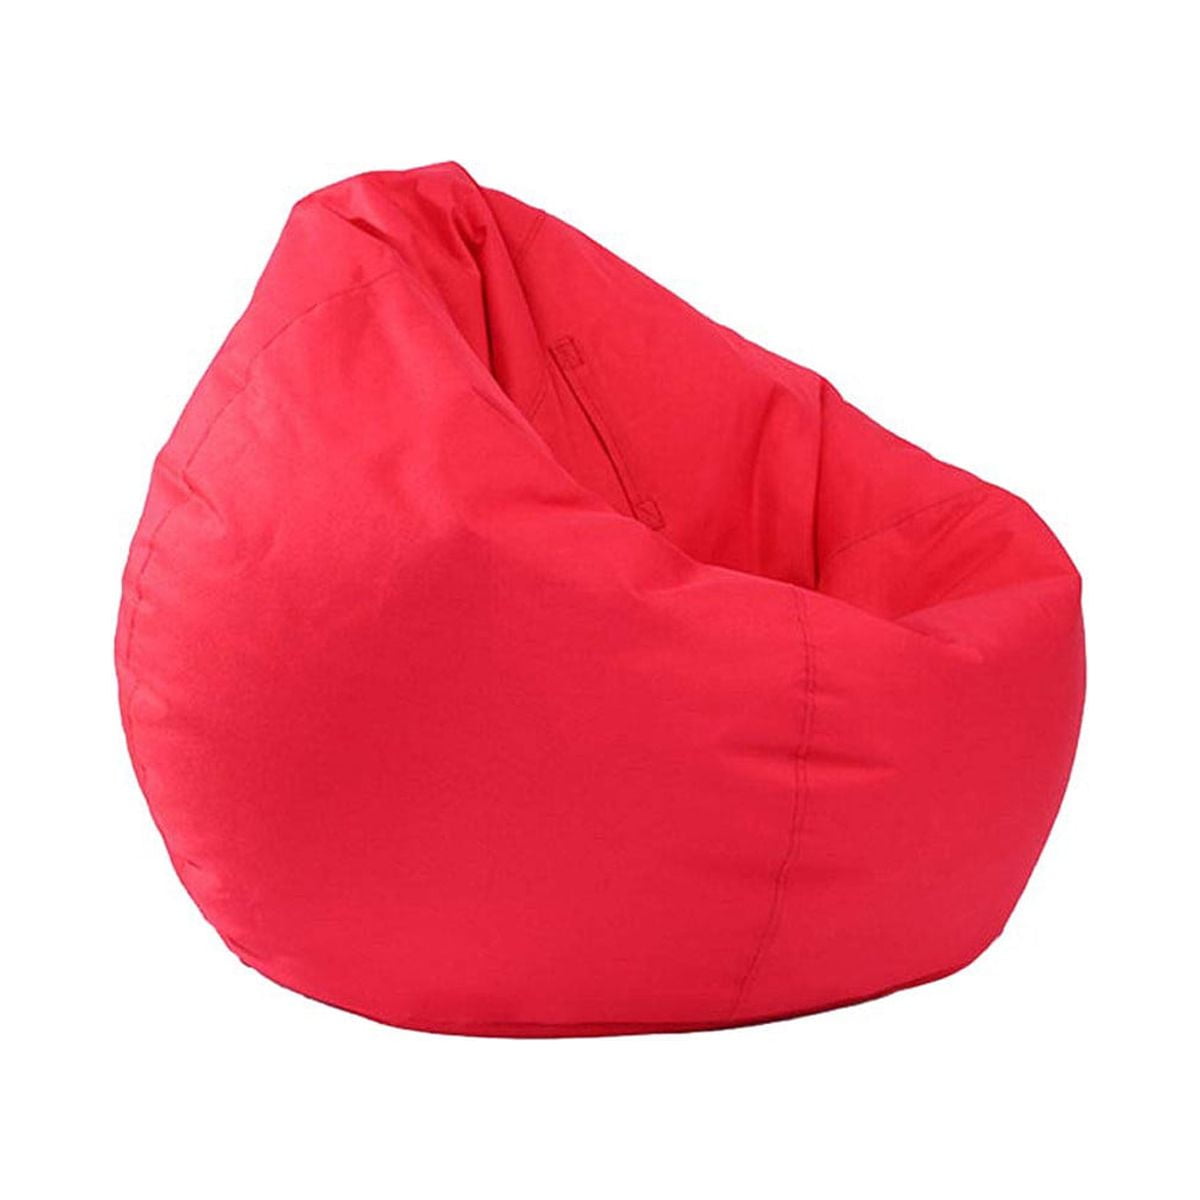 Large Adult Outdoor Gaming Bean Bag (Filler Not Included), Size: One size, Orange